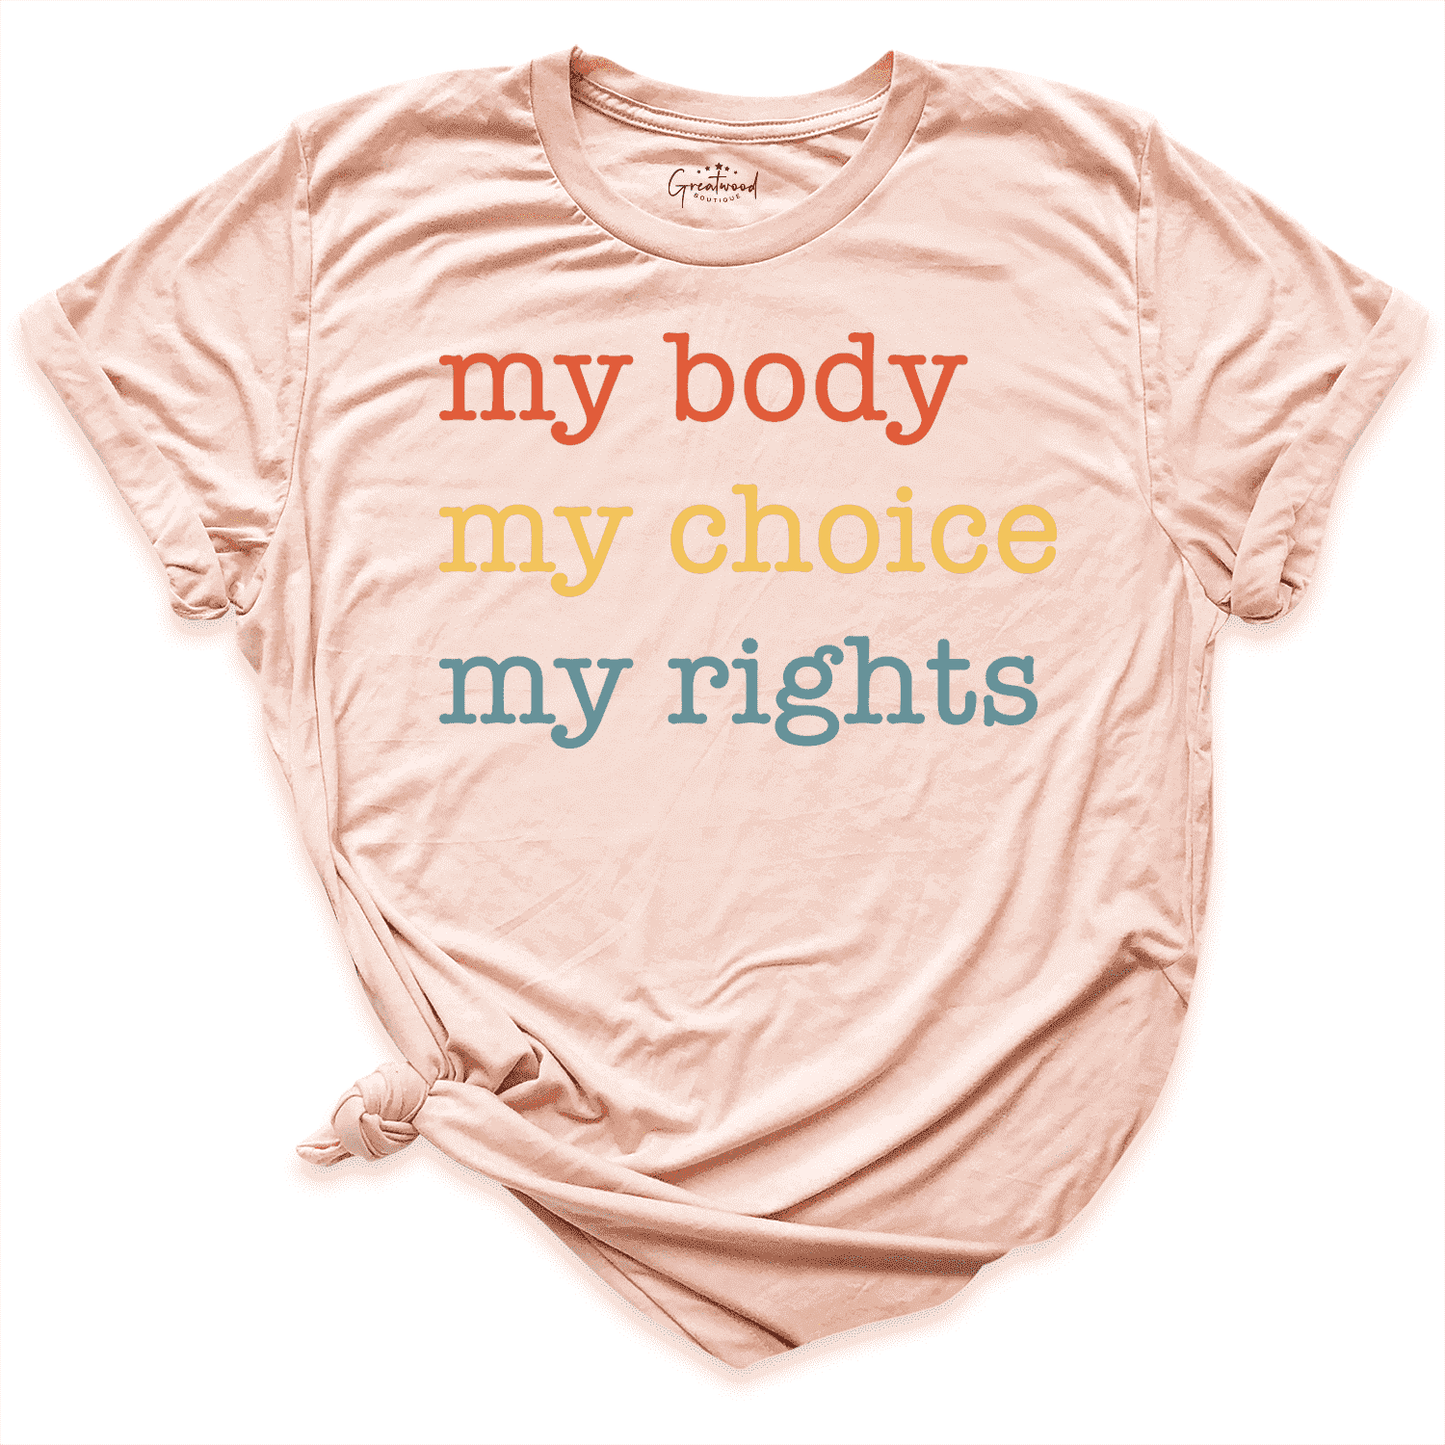 My Body My Choice My Rights Shirt Peach - Greatwood Boutique